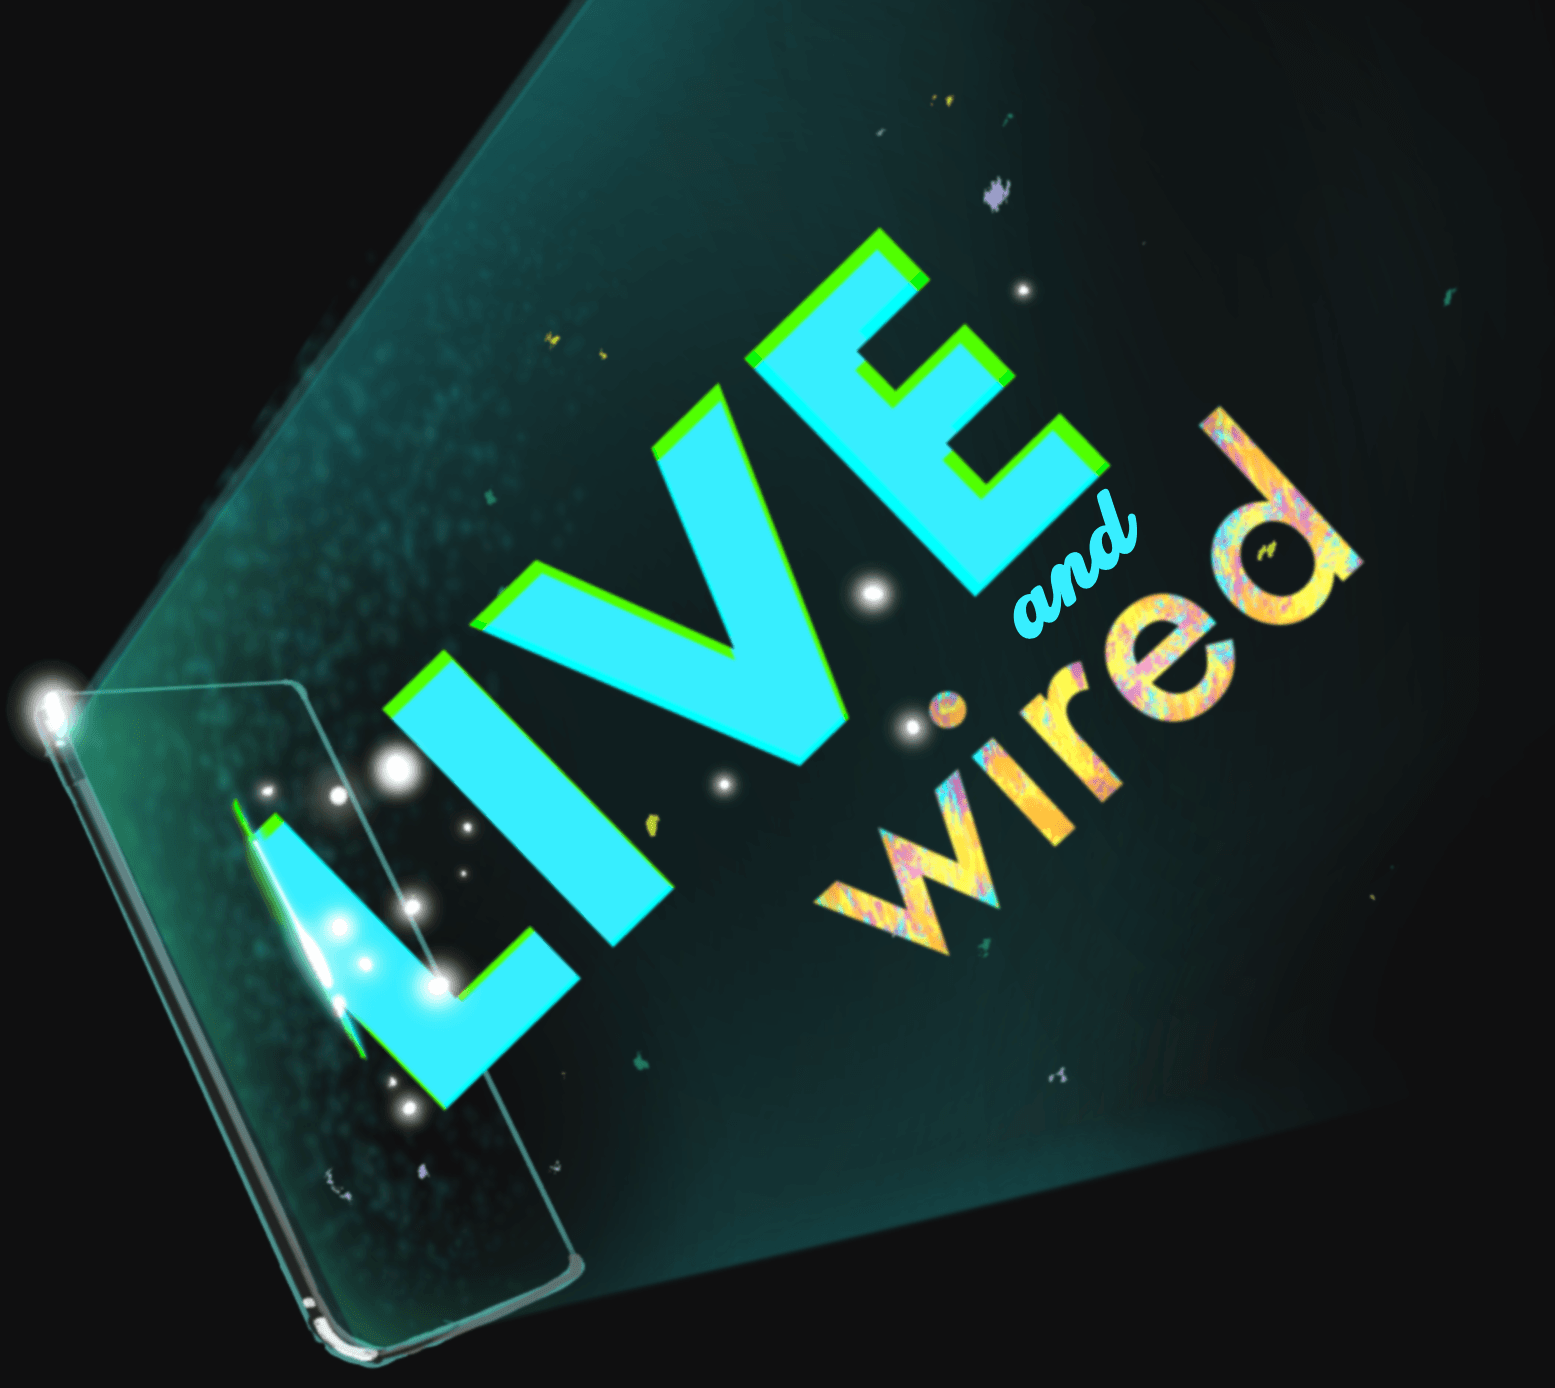 Link to information about the Live and Wired Event